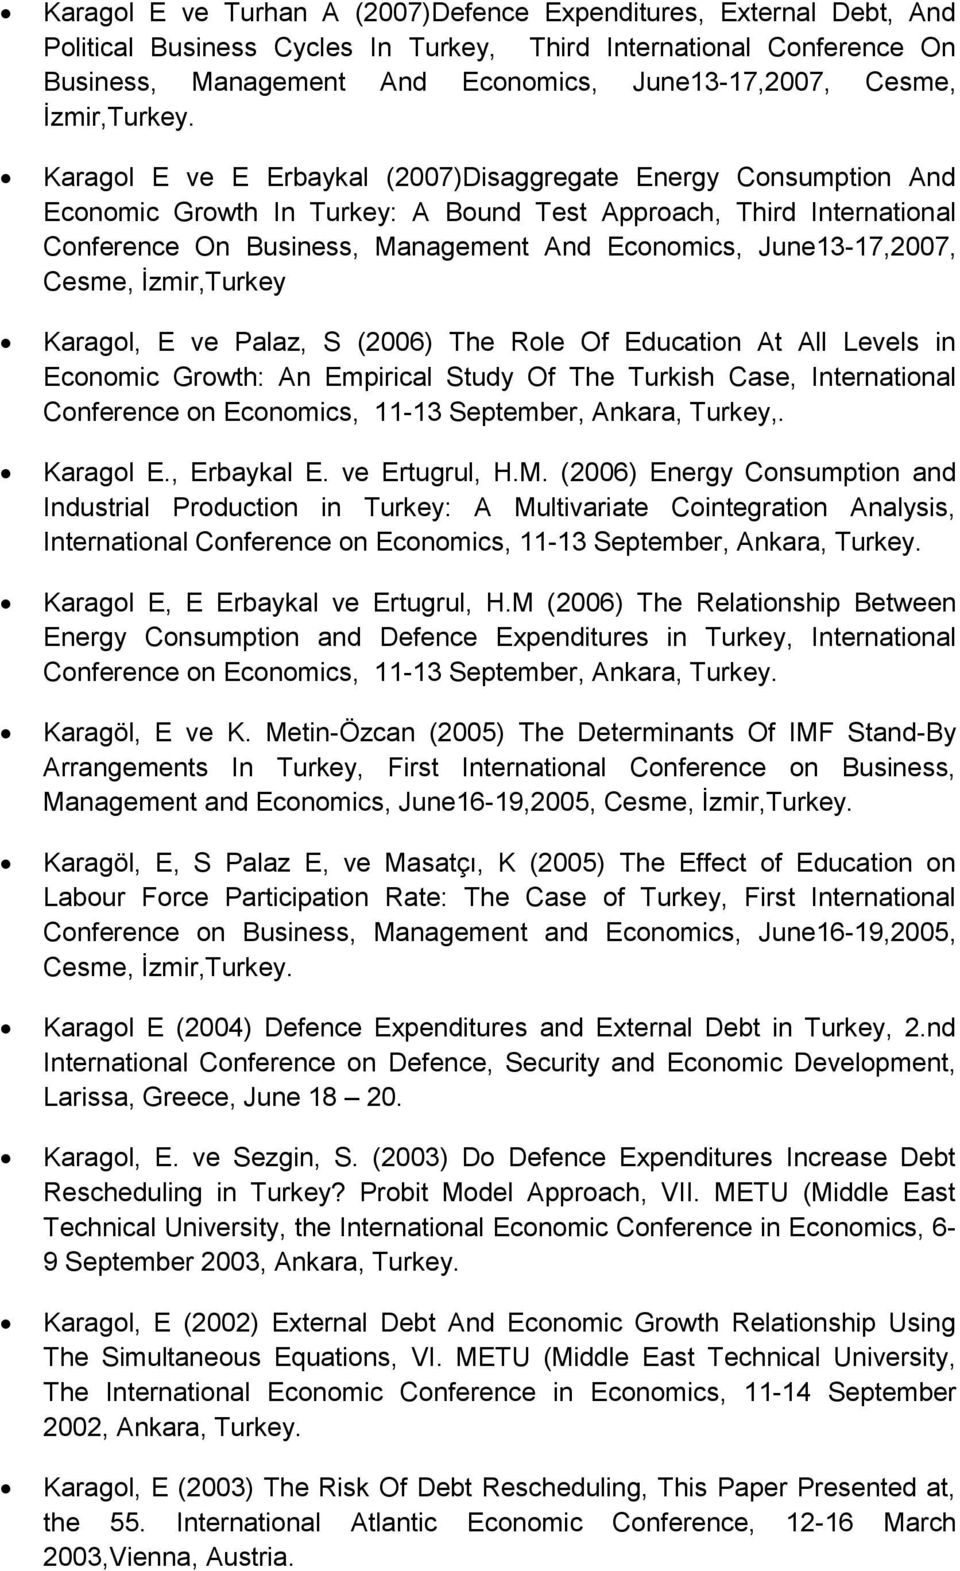 Karagol E ve E Erbaykal (2007)Disaggregate Energy Consumption And Economic Growth In Turkey: A Bound Test Approach, Third International Conference On Business, Management And Economics,